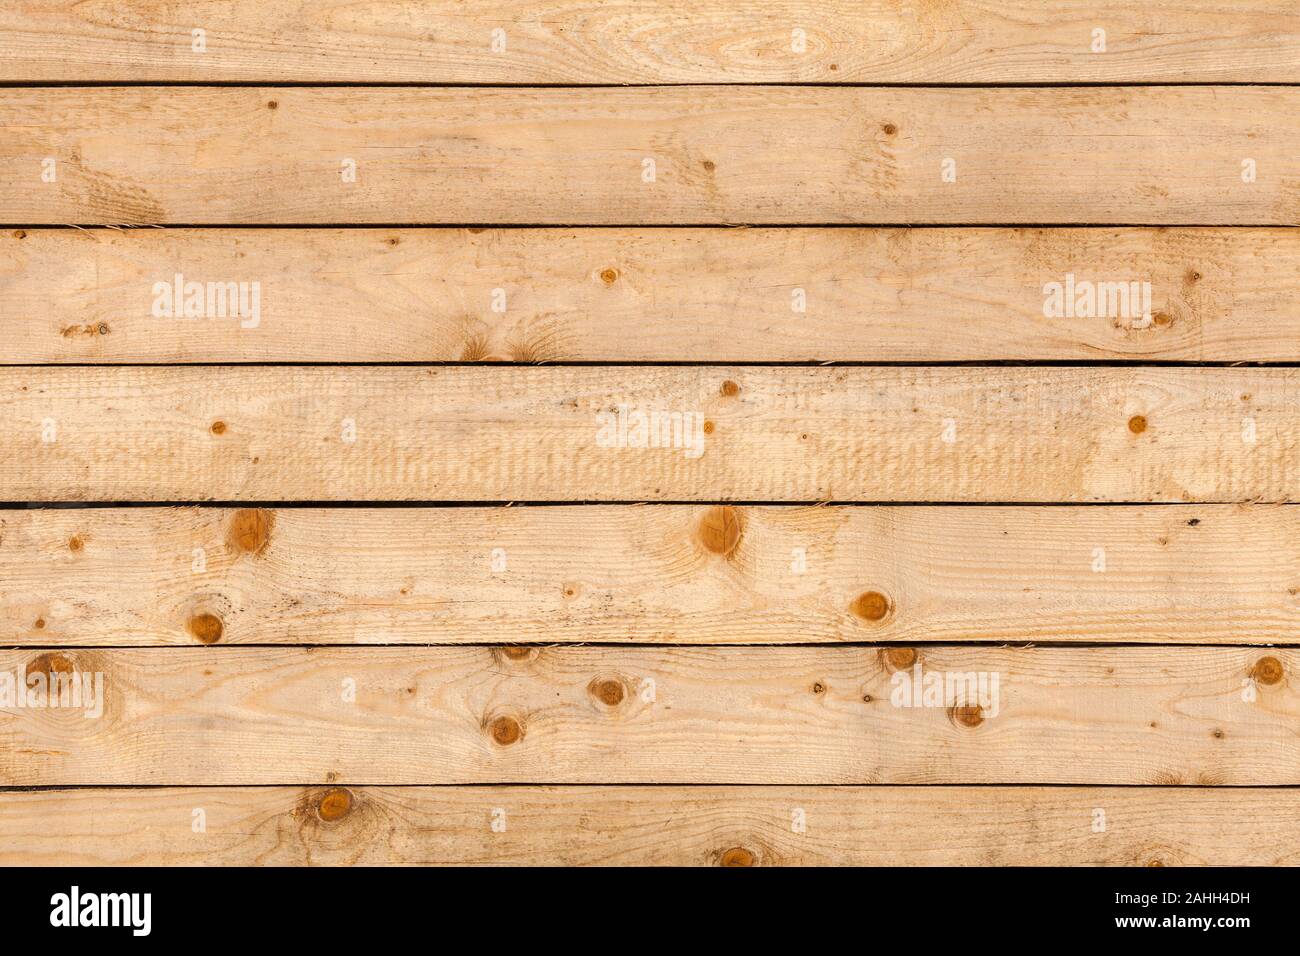 Natural Wooden Wall Made Of Uncolored Pine Tree Planks Frontal Flat Background Photo Texture Stock Photo Alamy